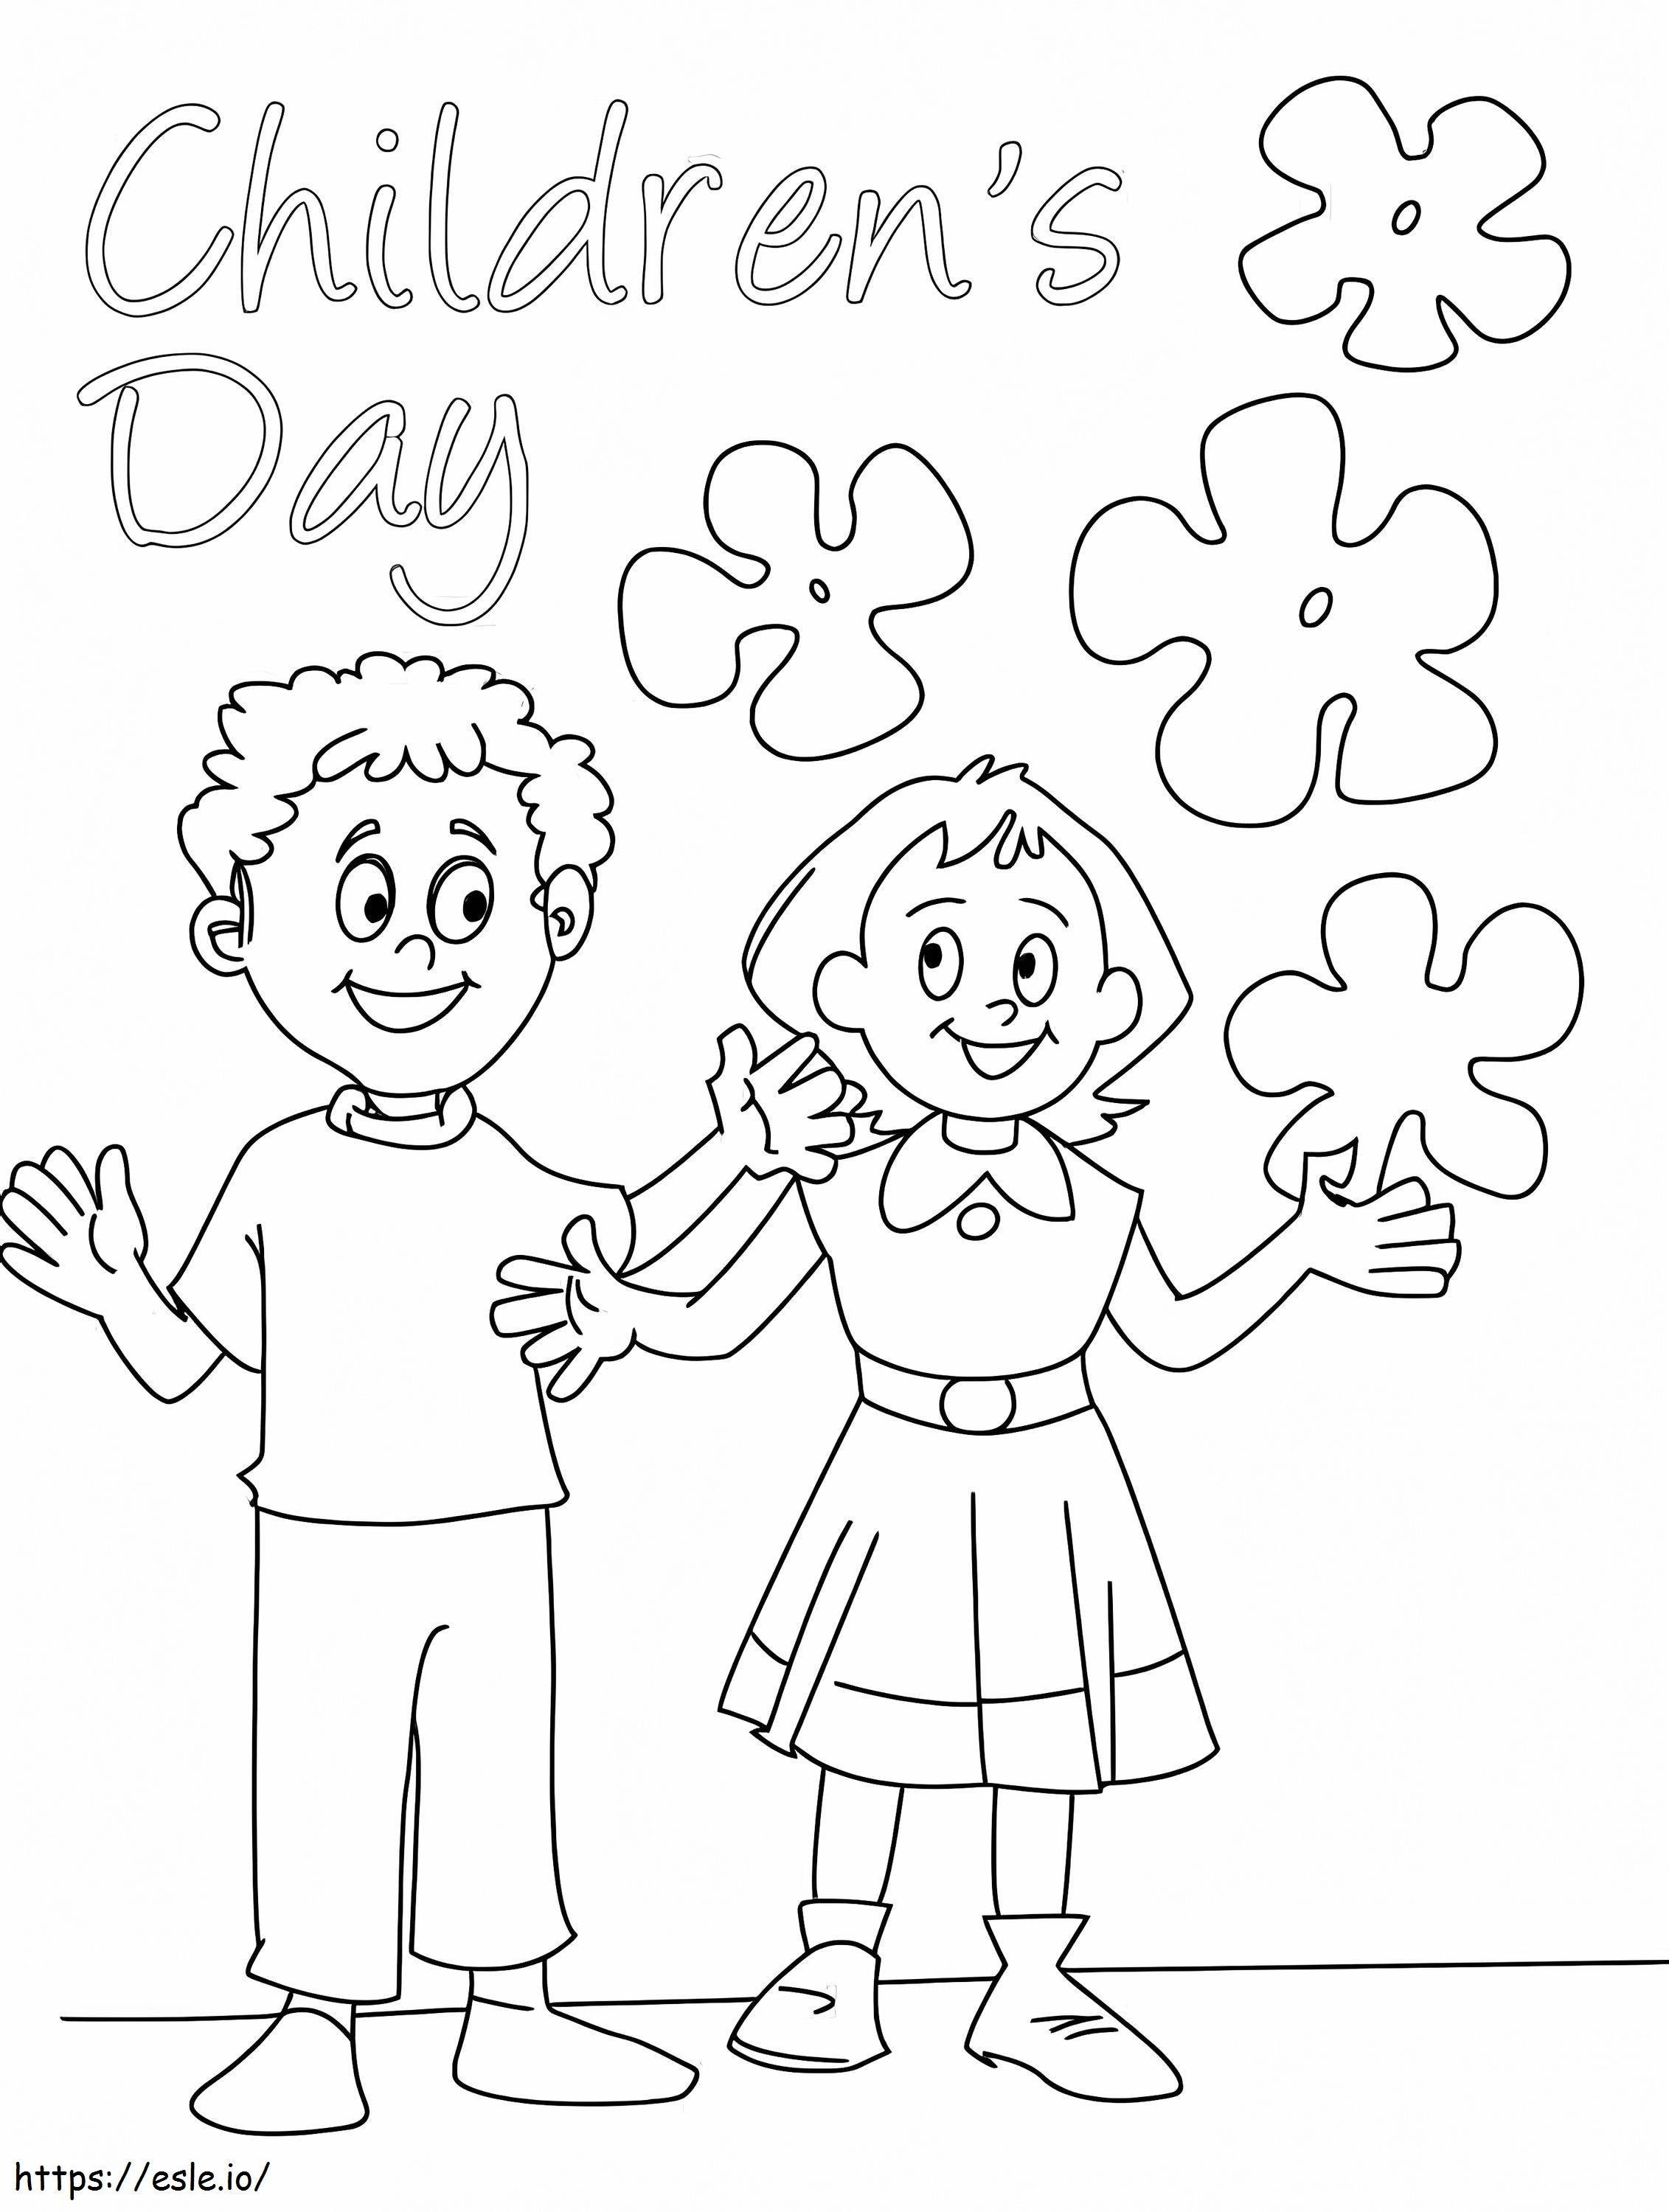 Childrens Day 5 coloring page